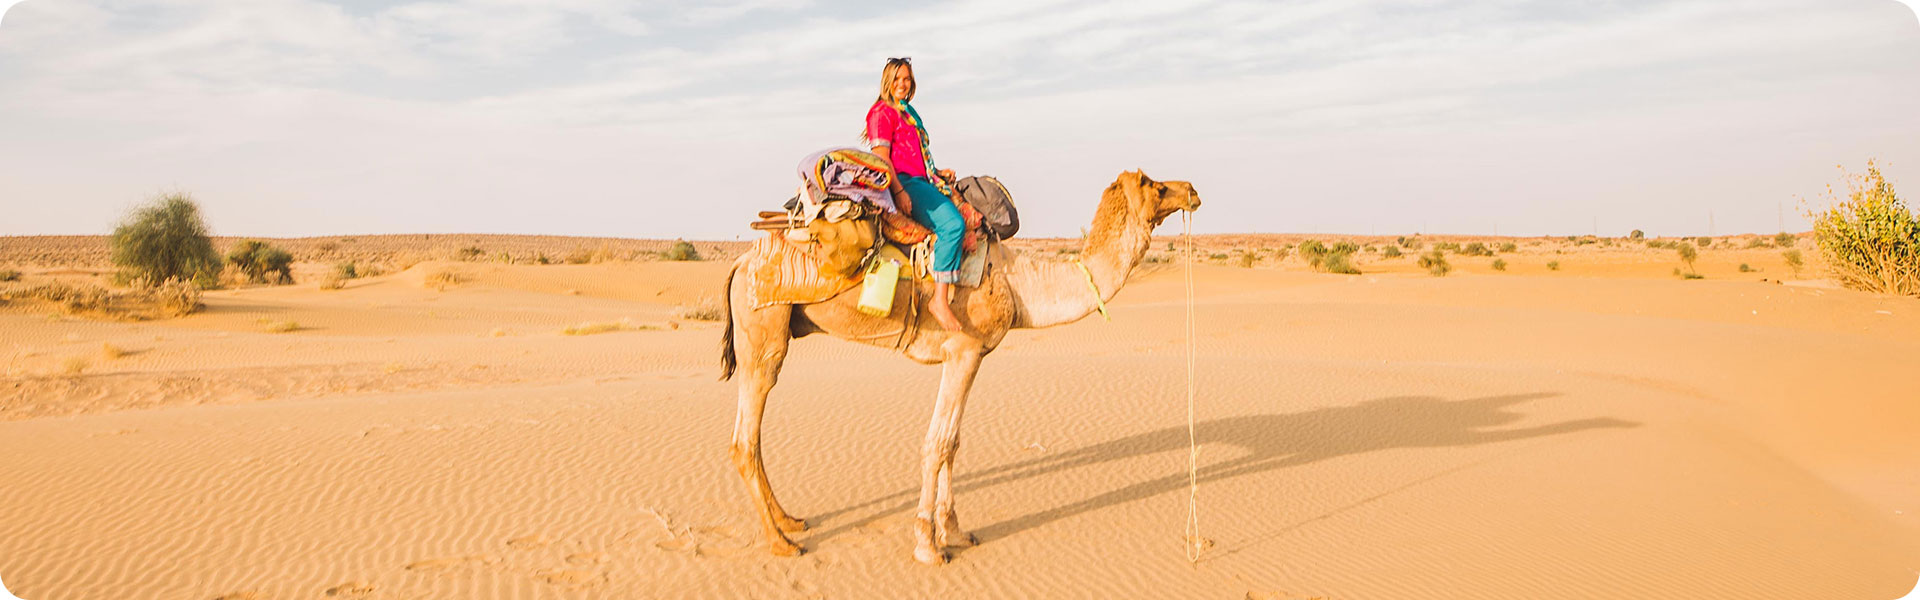 camel-safari-in-jaisalmer-trotters-tours-and-travels